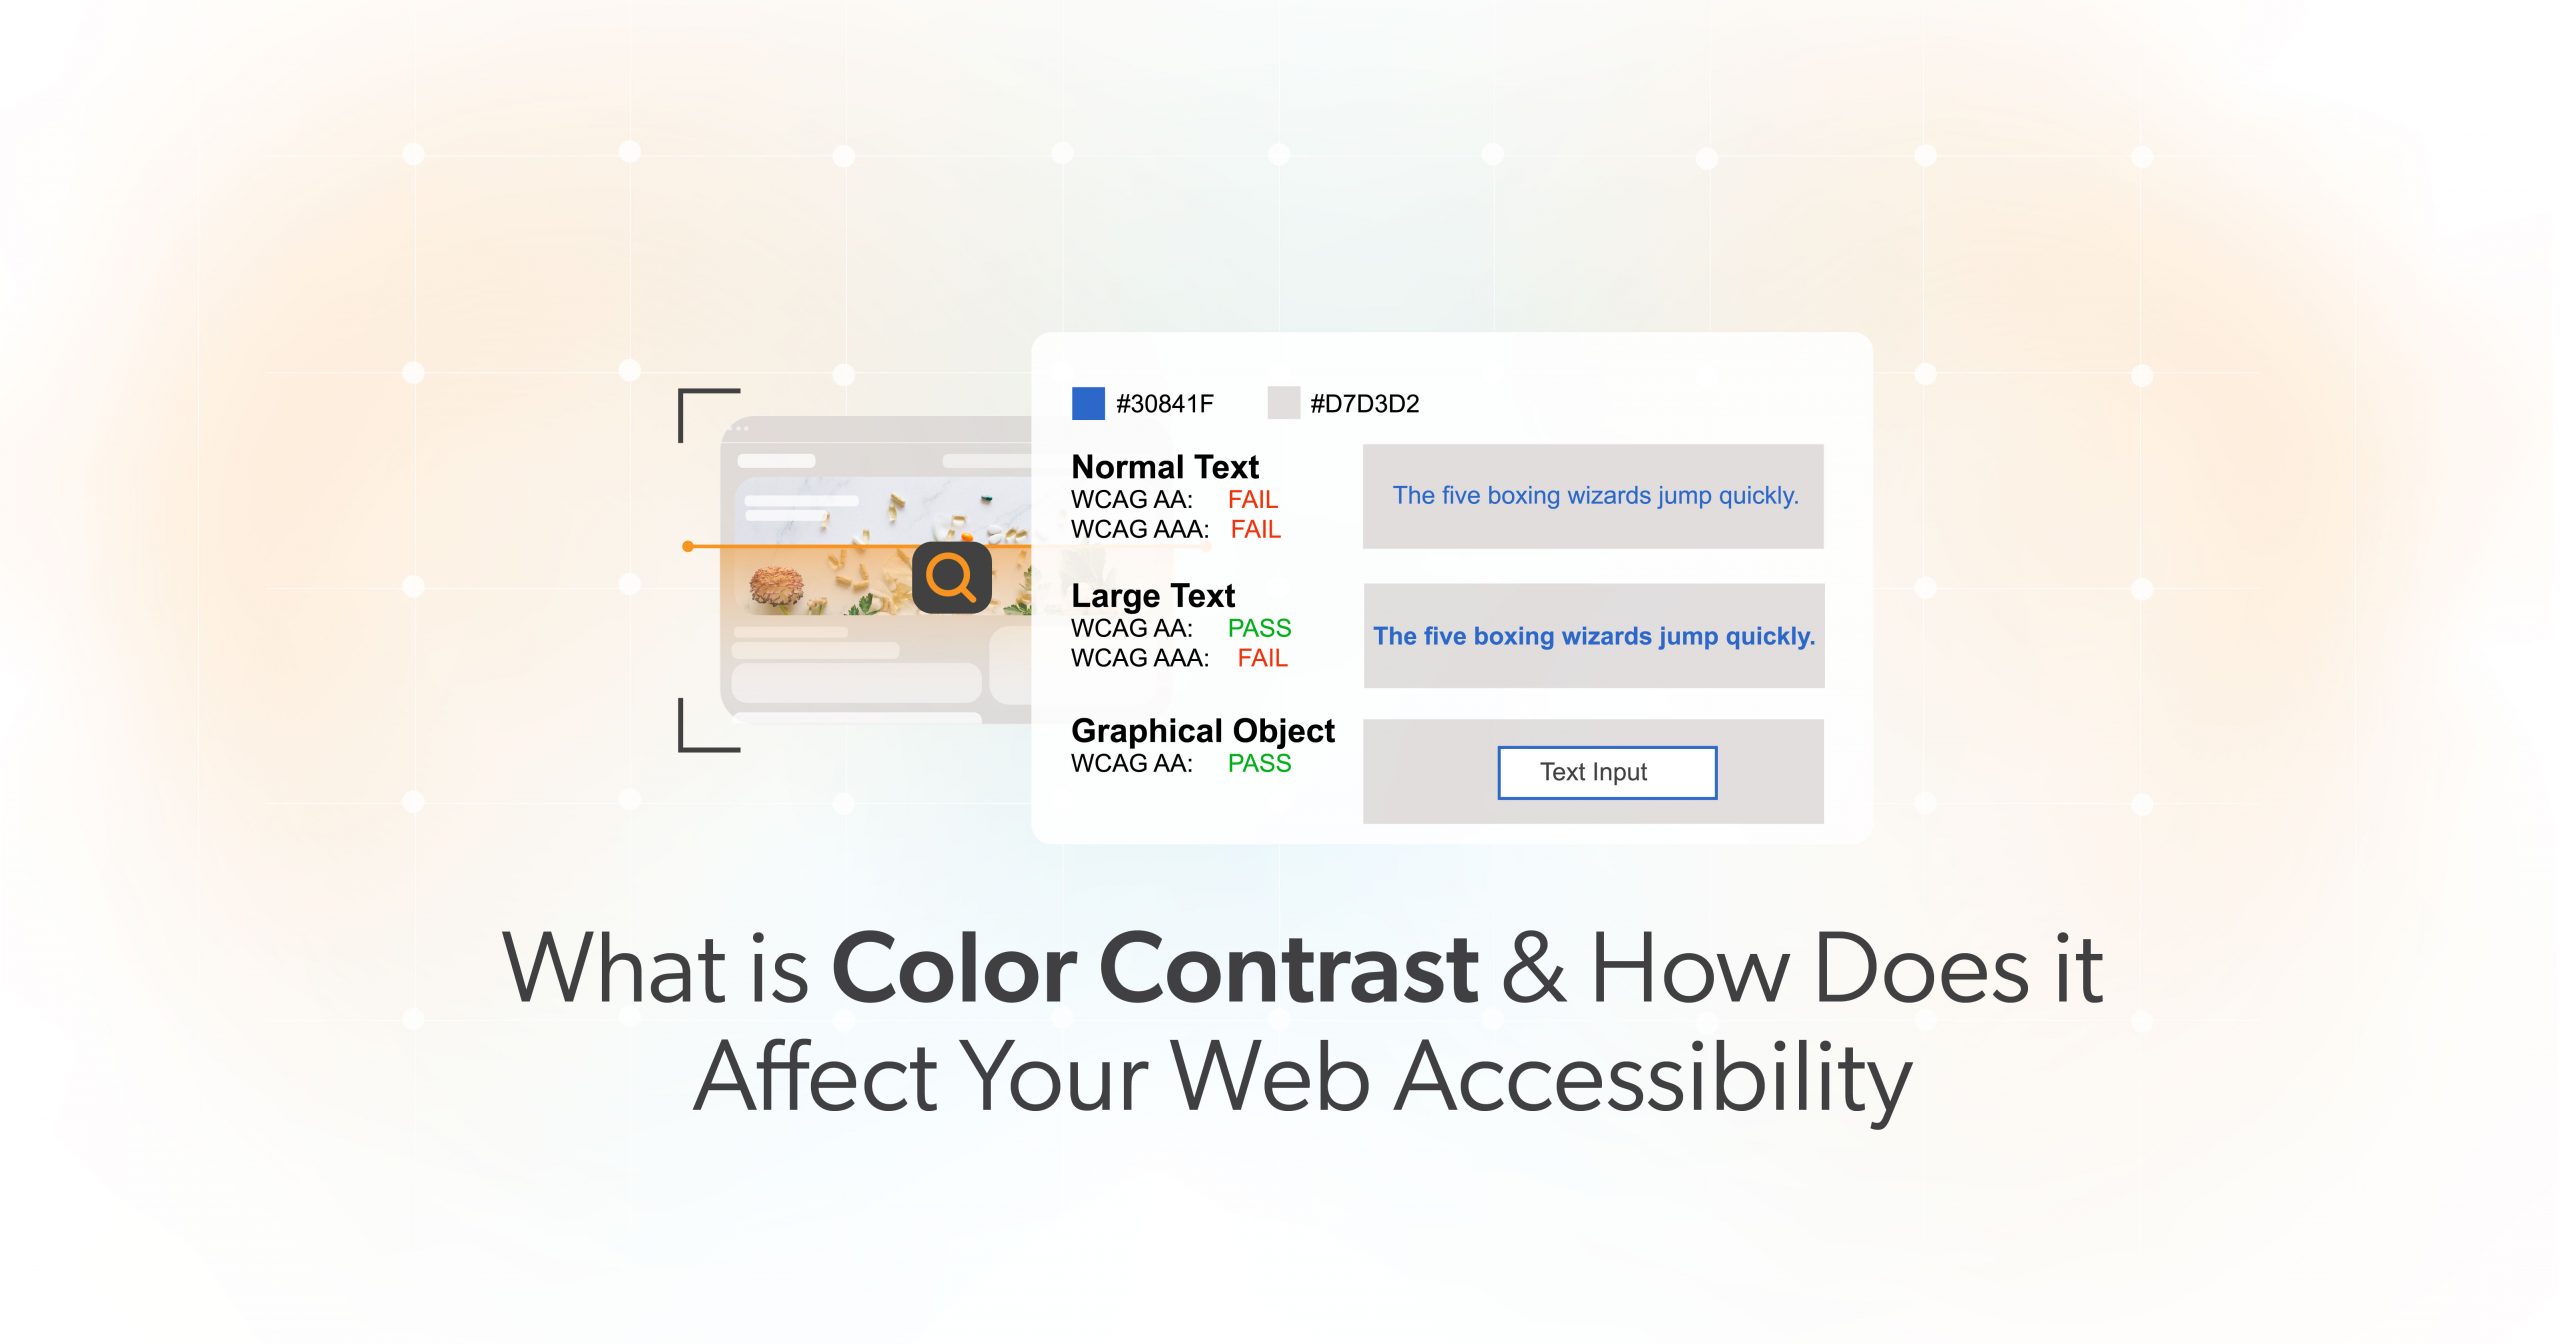 What is Color Contrast and How Does it Affect Your Web Accessibility?